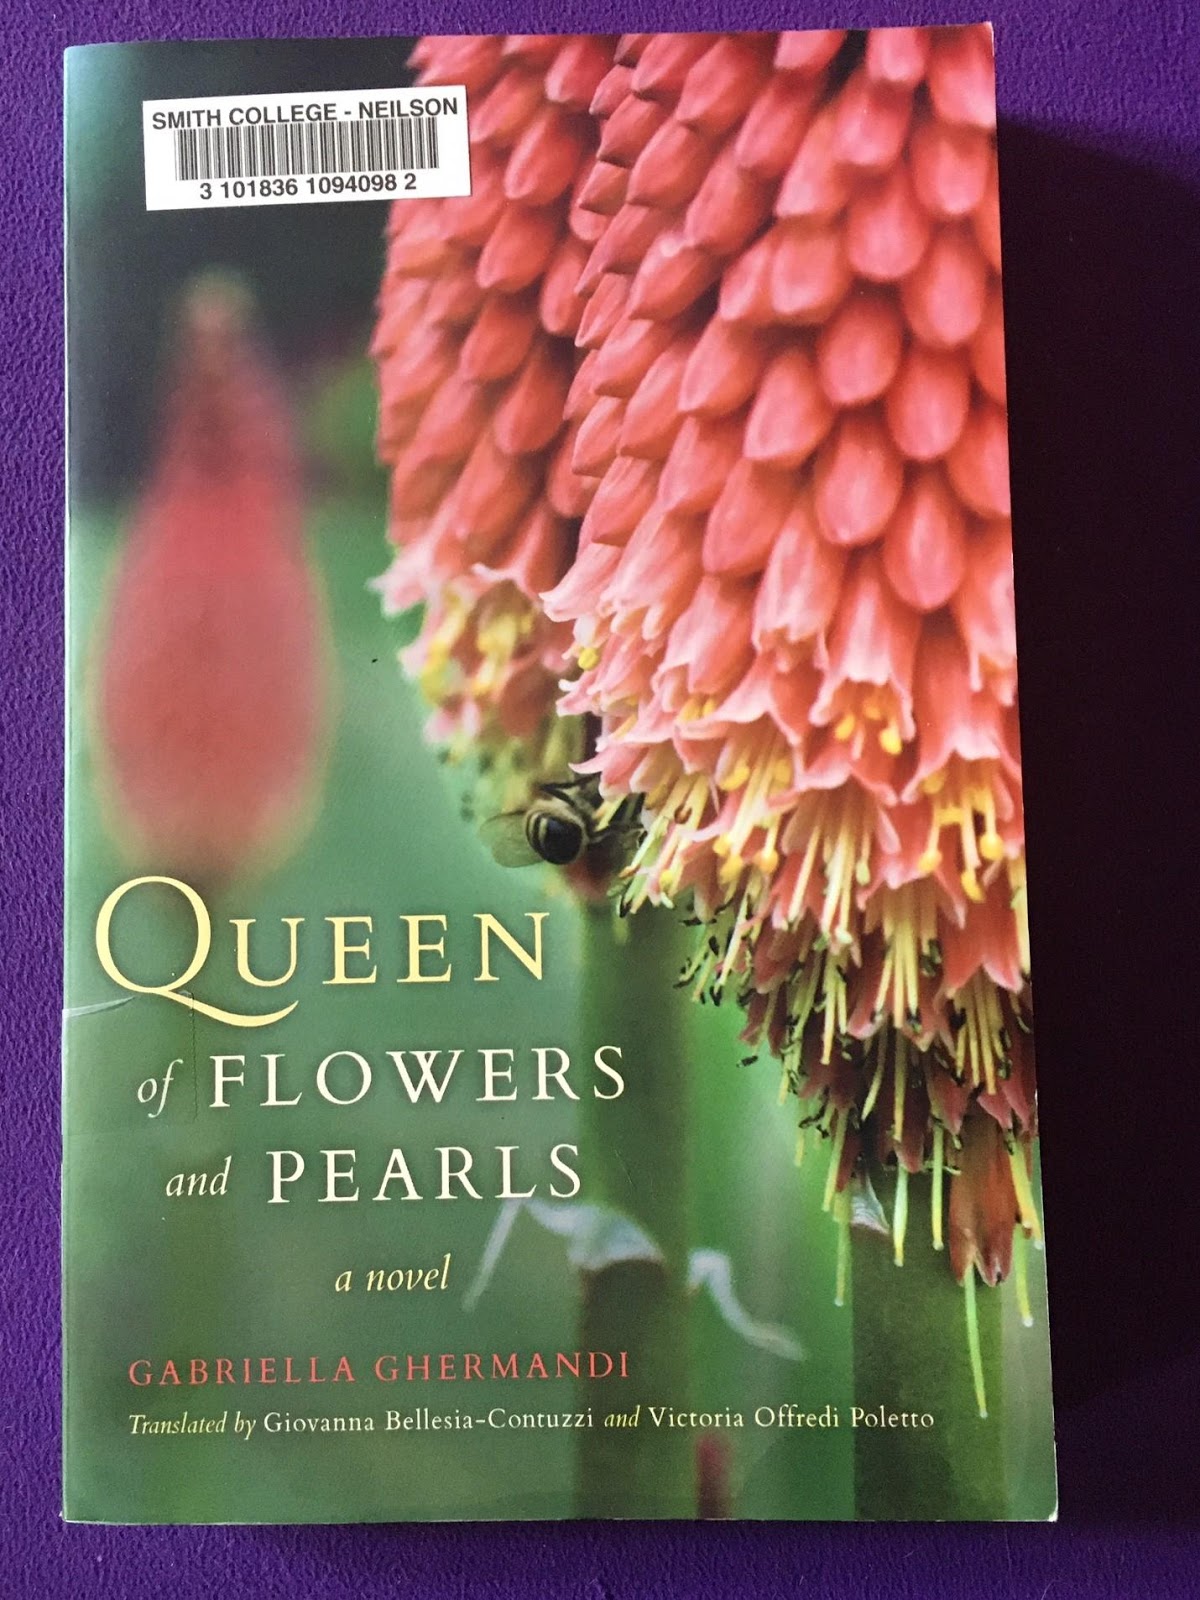 Cover of Queen of Flowers and Pearls by Gabriella Ghermandi